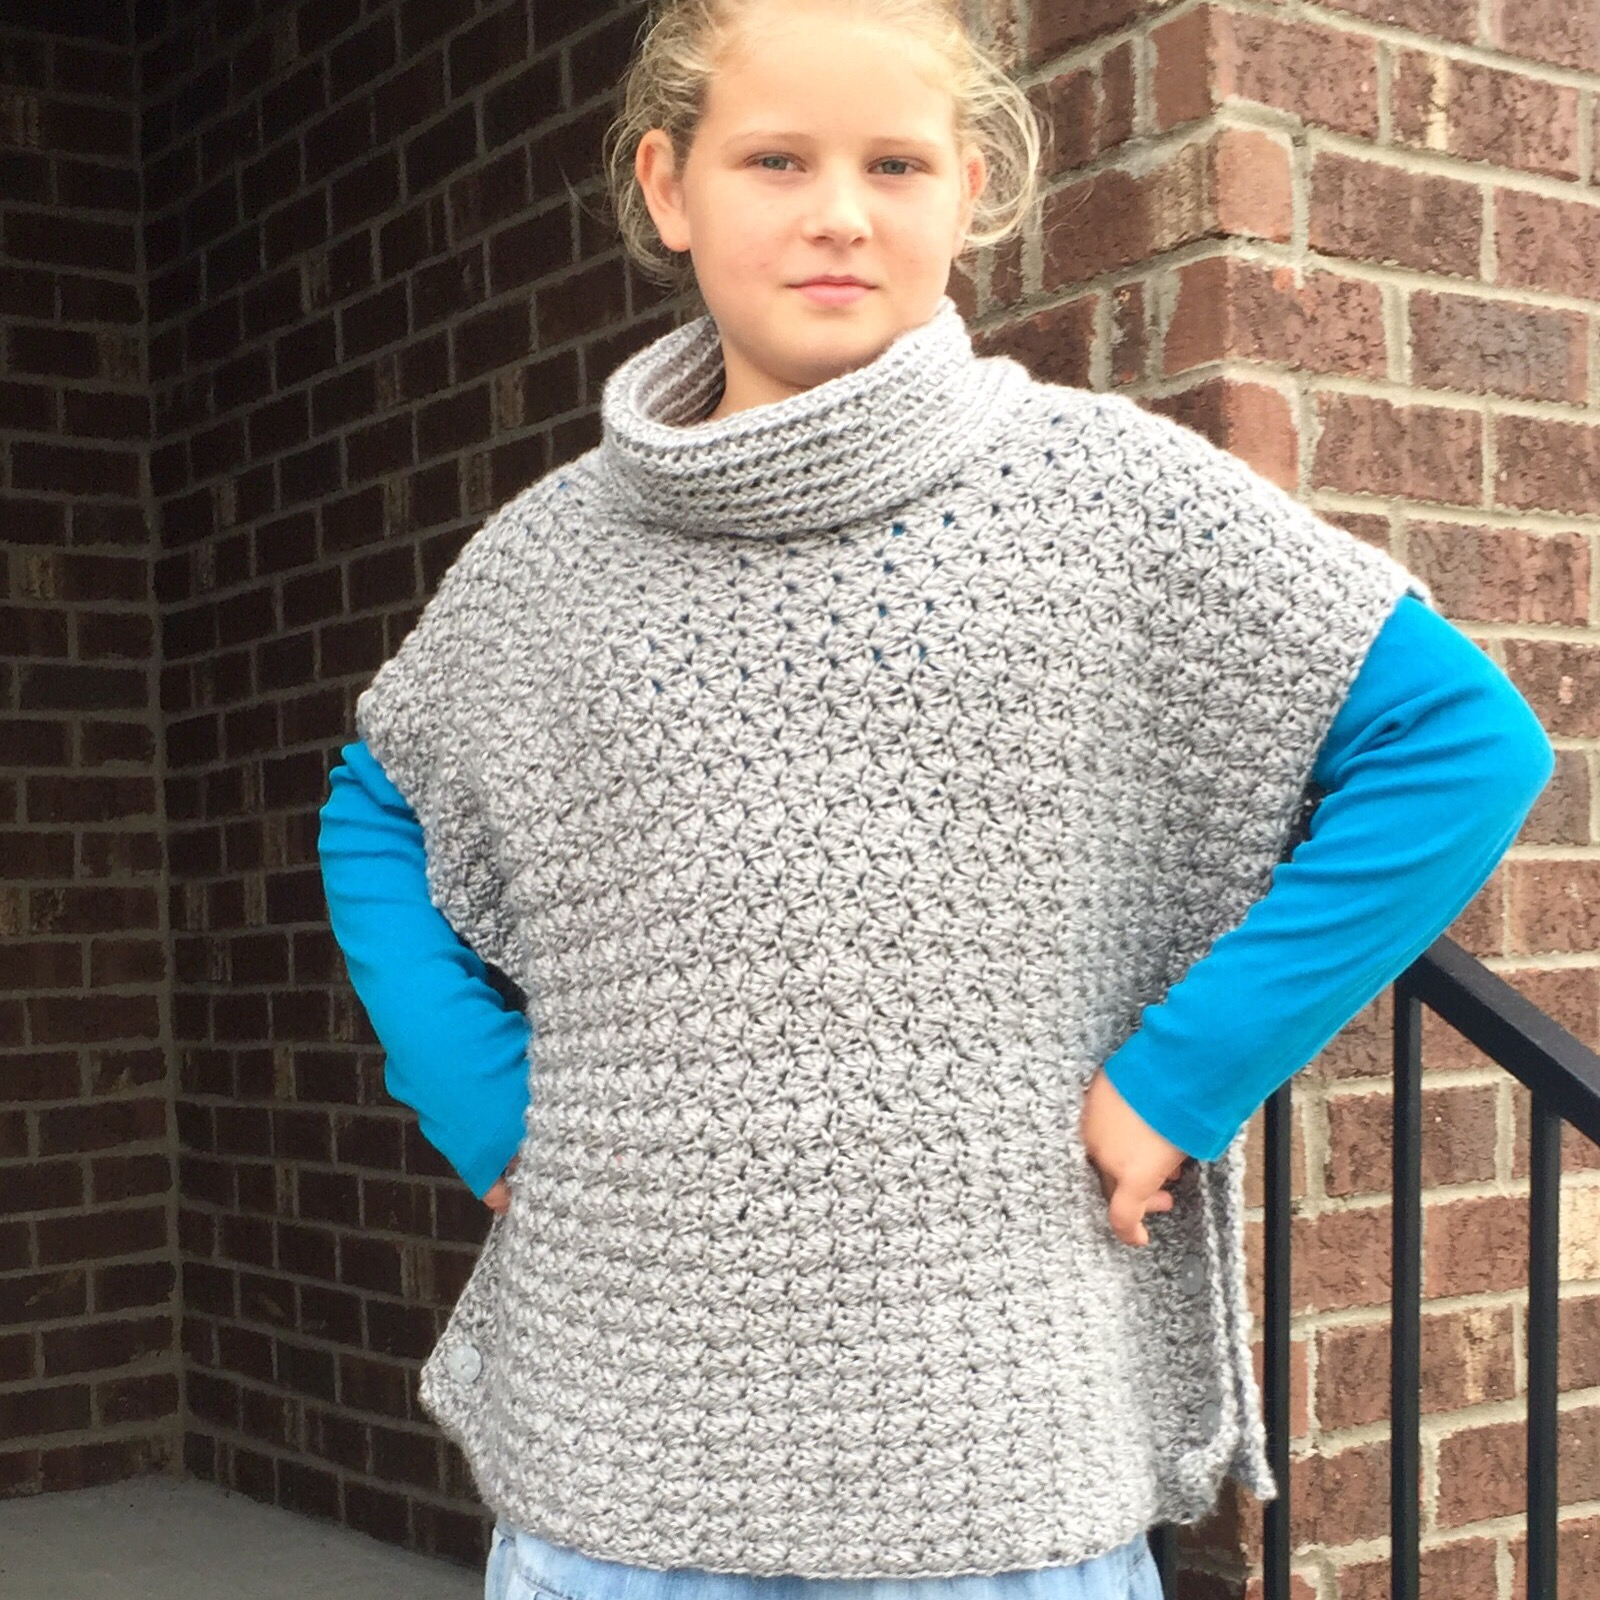 Free Crochet Patterns For Ponchos Crochet Pattern Fiona Poncho With Cowl For Babies Girls Teen